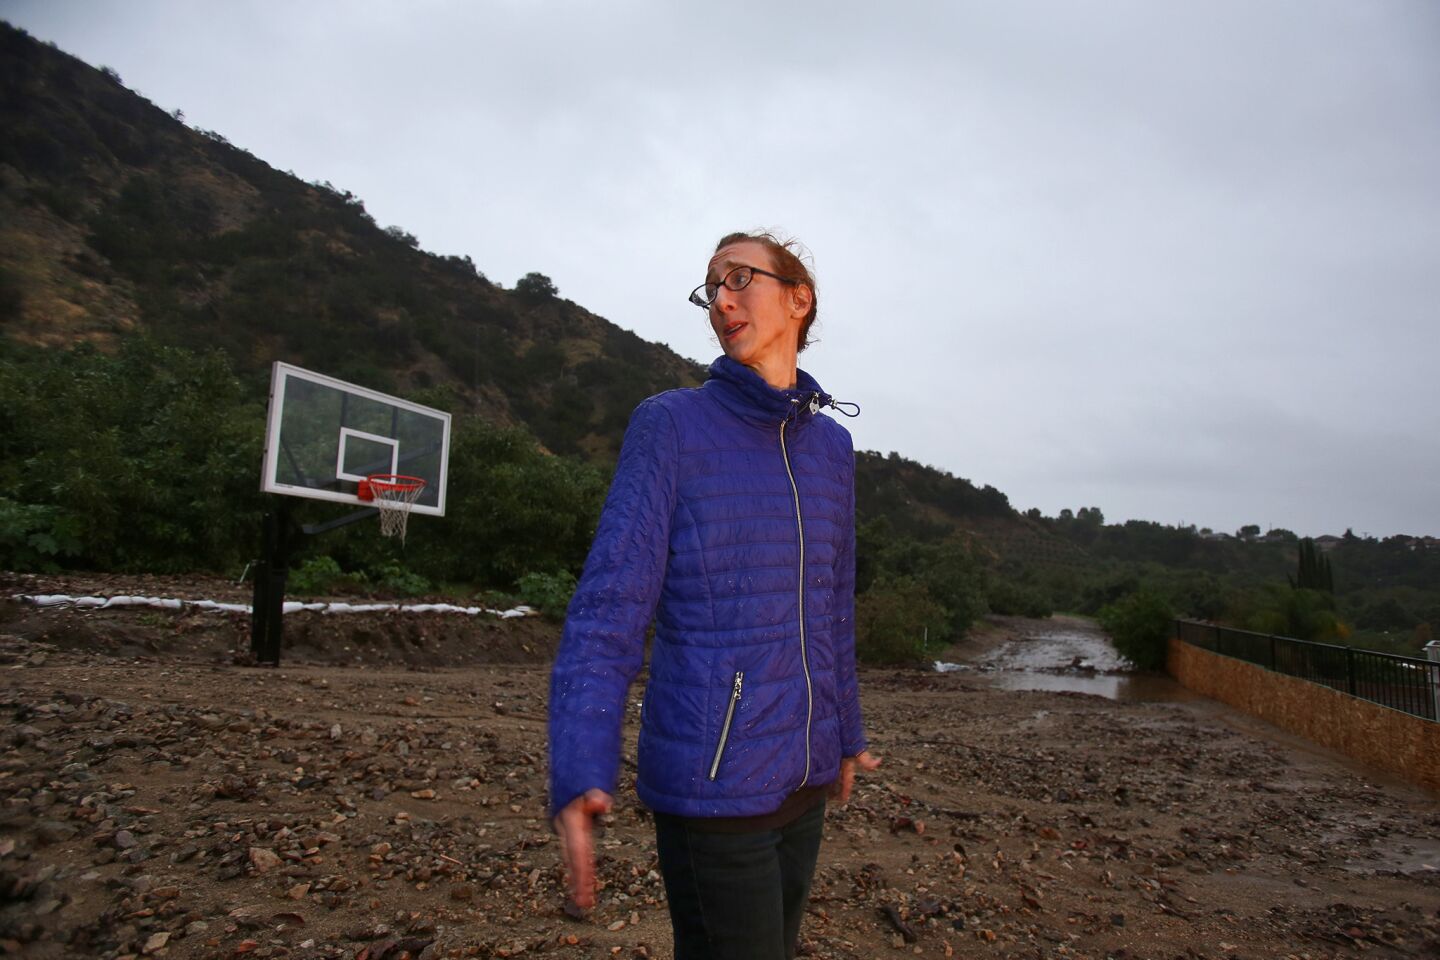 Amanda Heinlein stands by regular size basketball hoop in her backyard at Ridge View Drive that is buried in mud caused by early morning rain in Azusa.